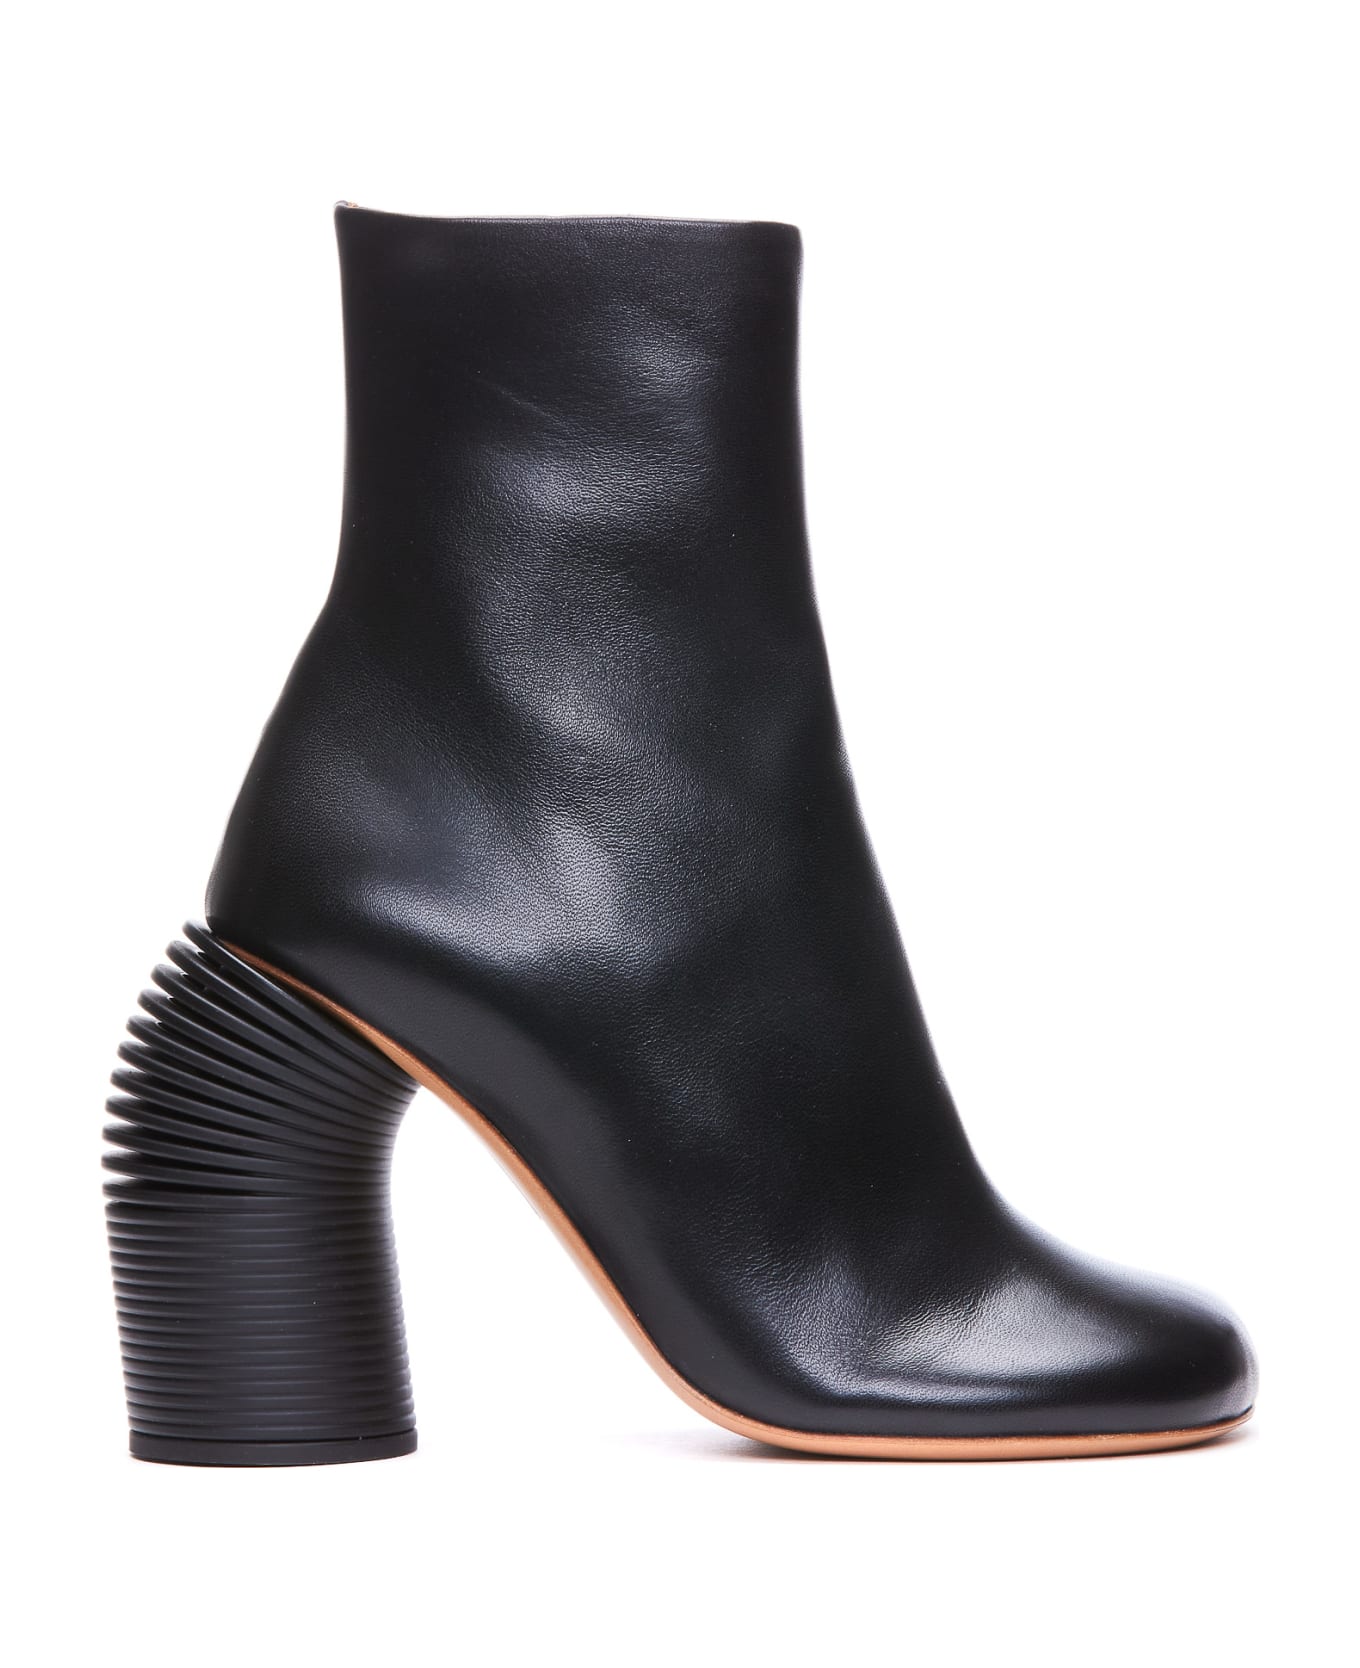 Off-White Spring Ankle Boots - Nero ブーツ